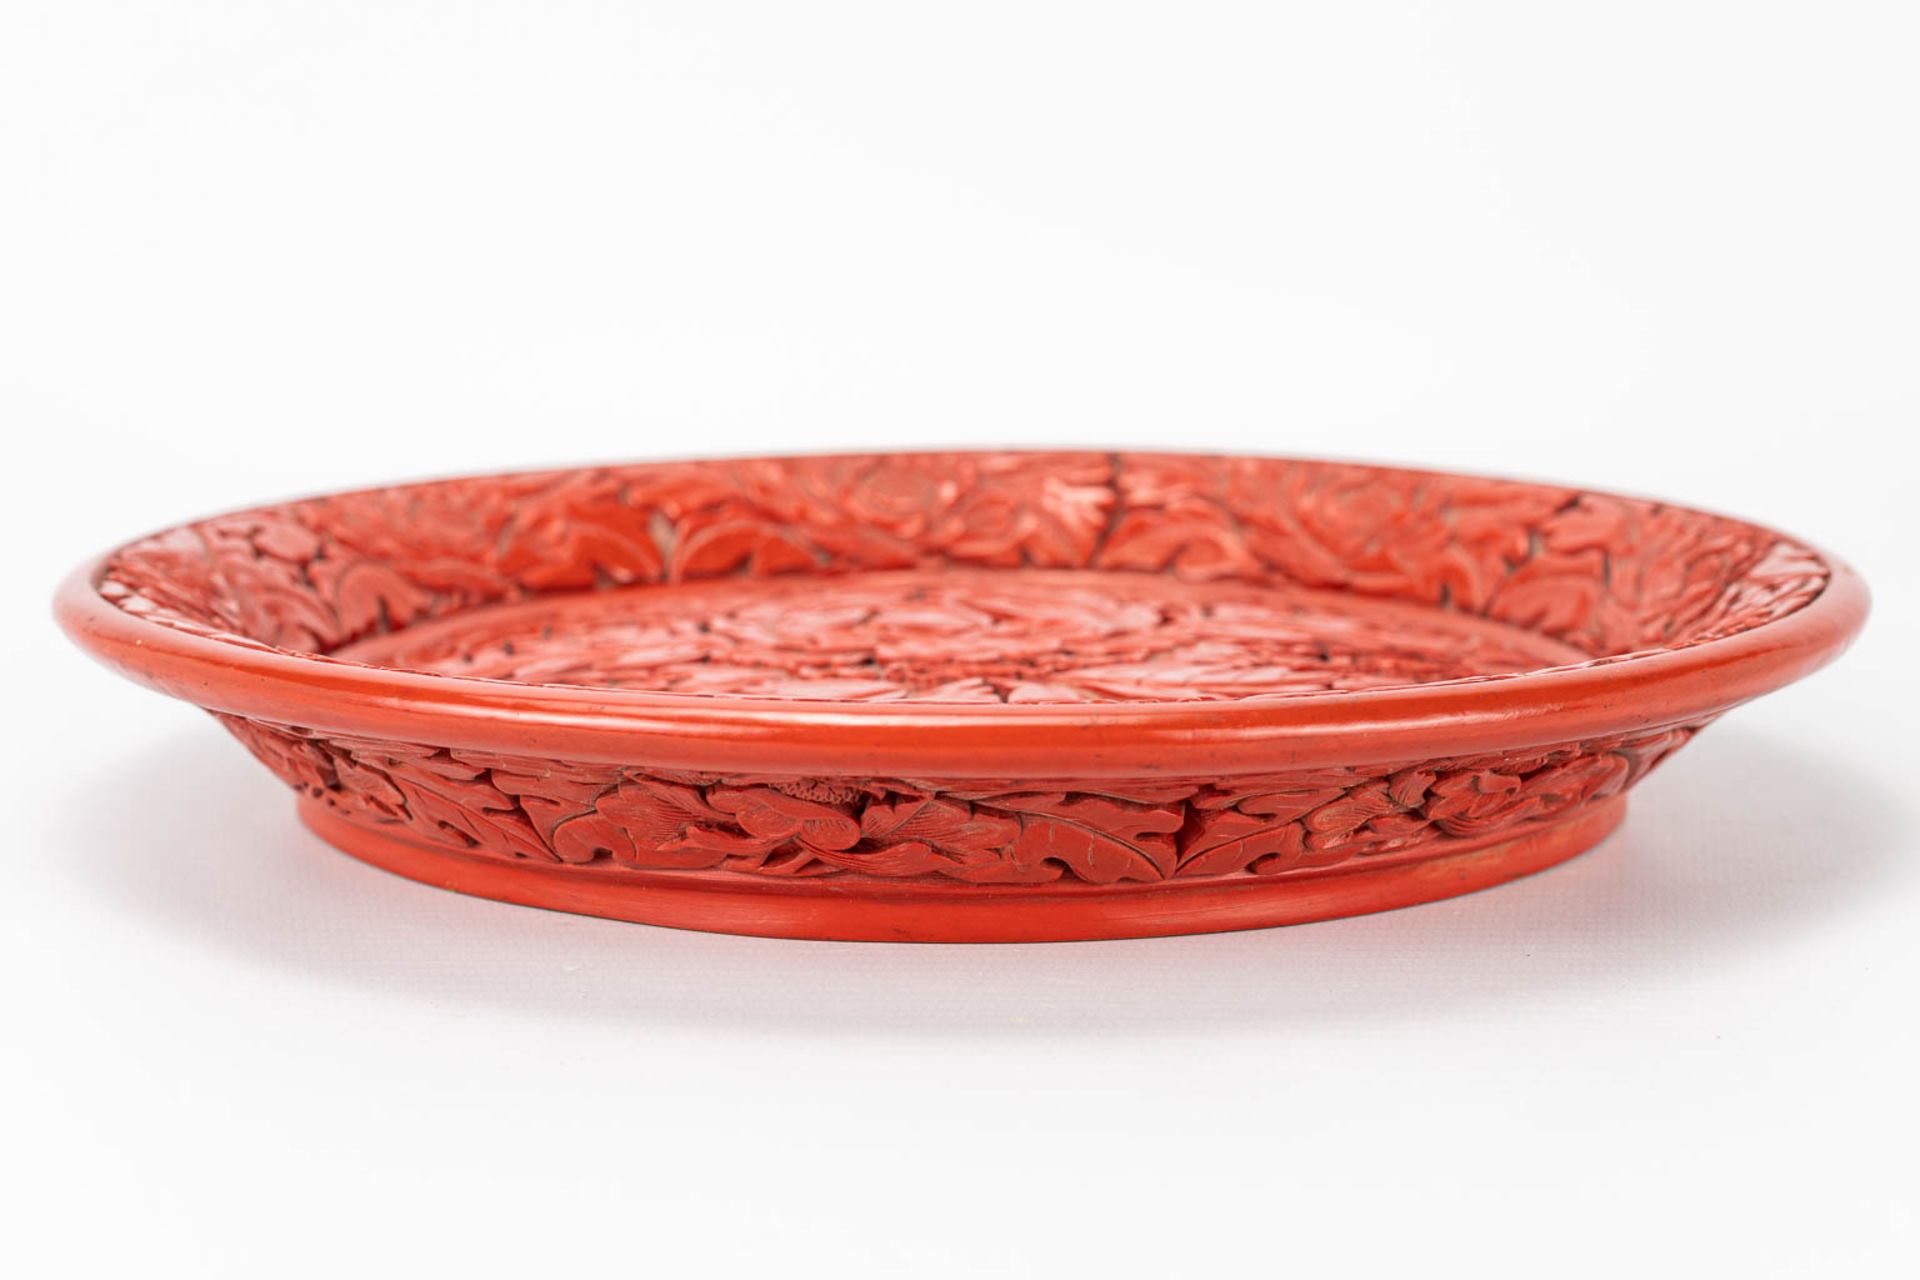 A plate made of lacquered cinnabar and made in China. - Image 5 of 10